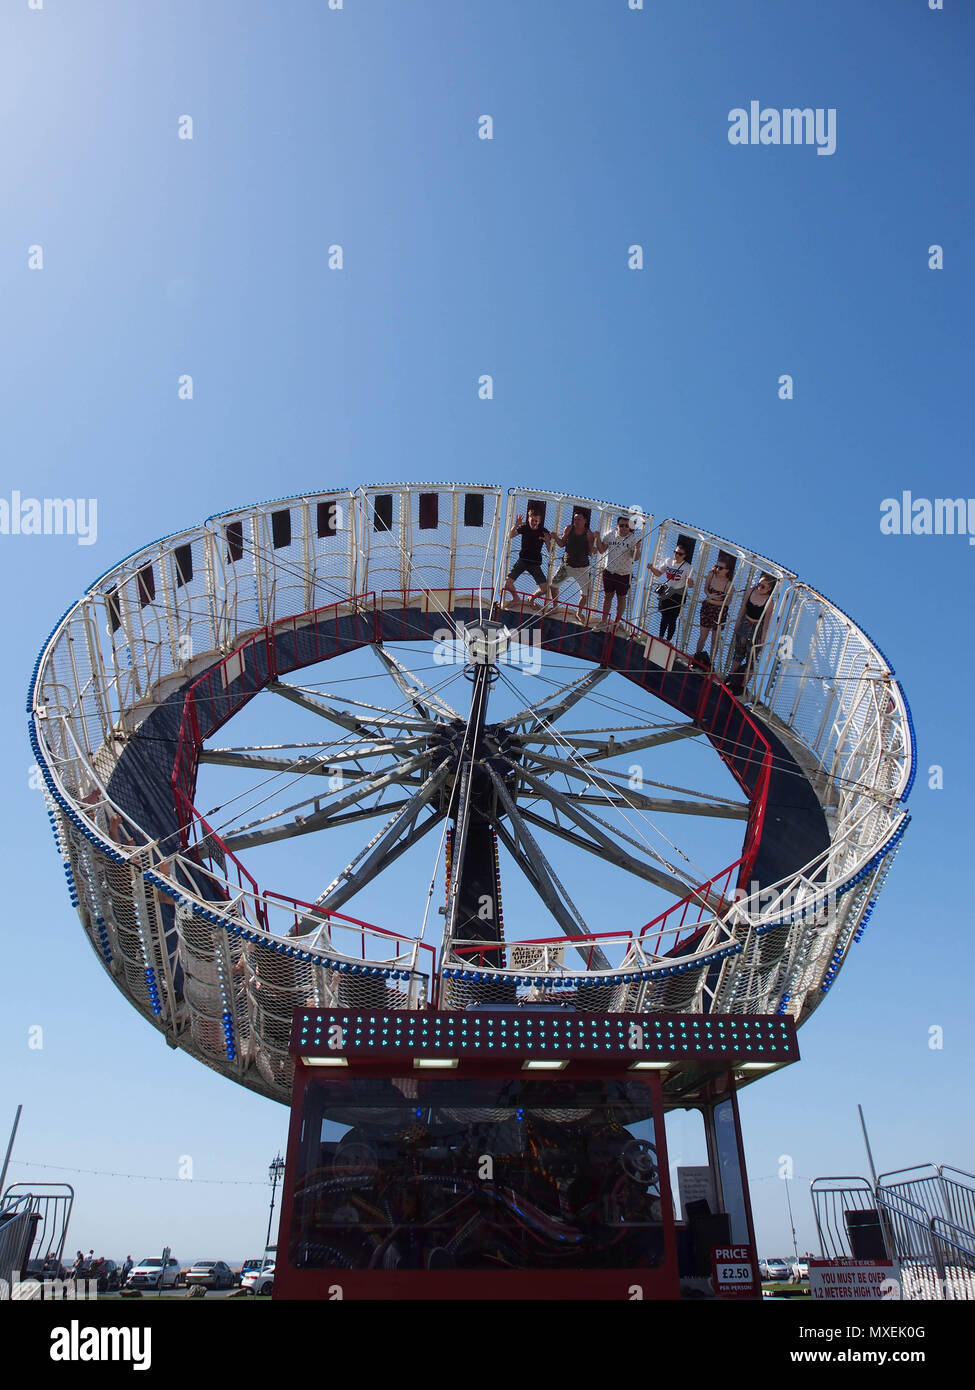 A spinning fairground ride Stock Photo